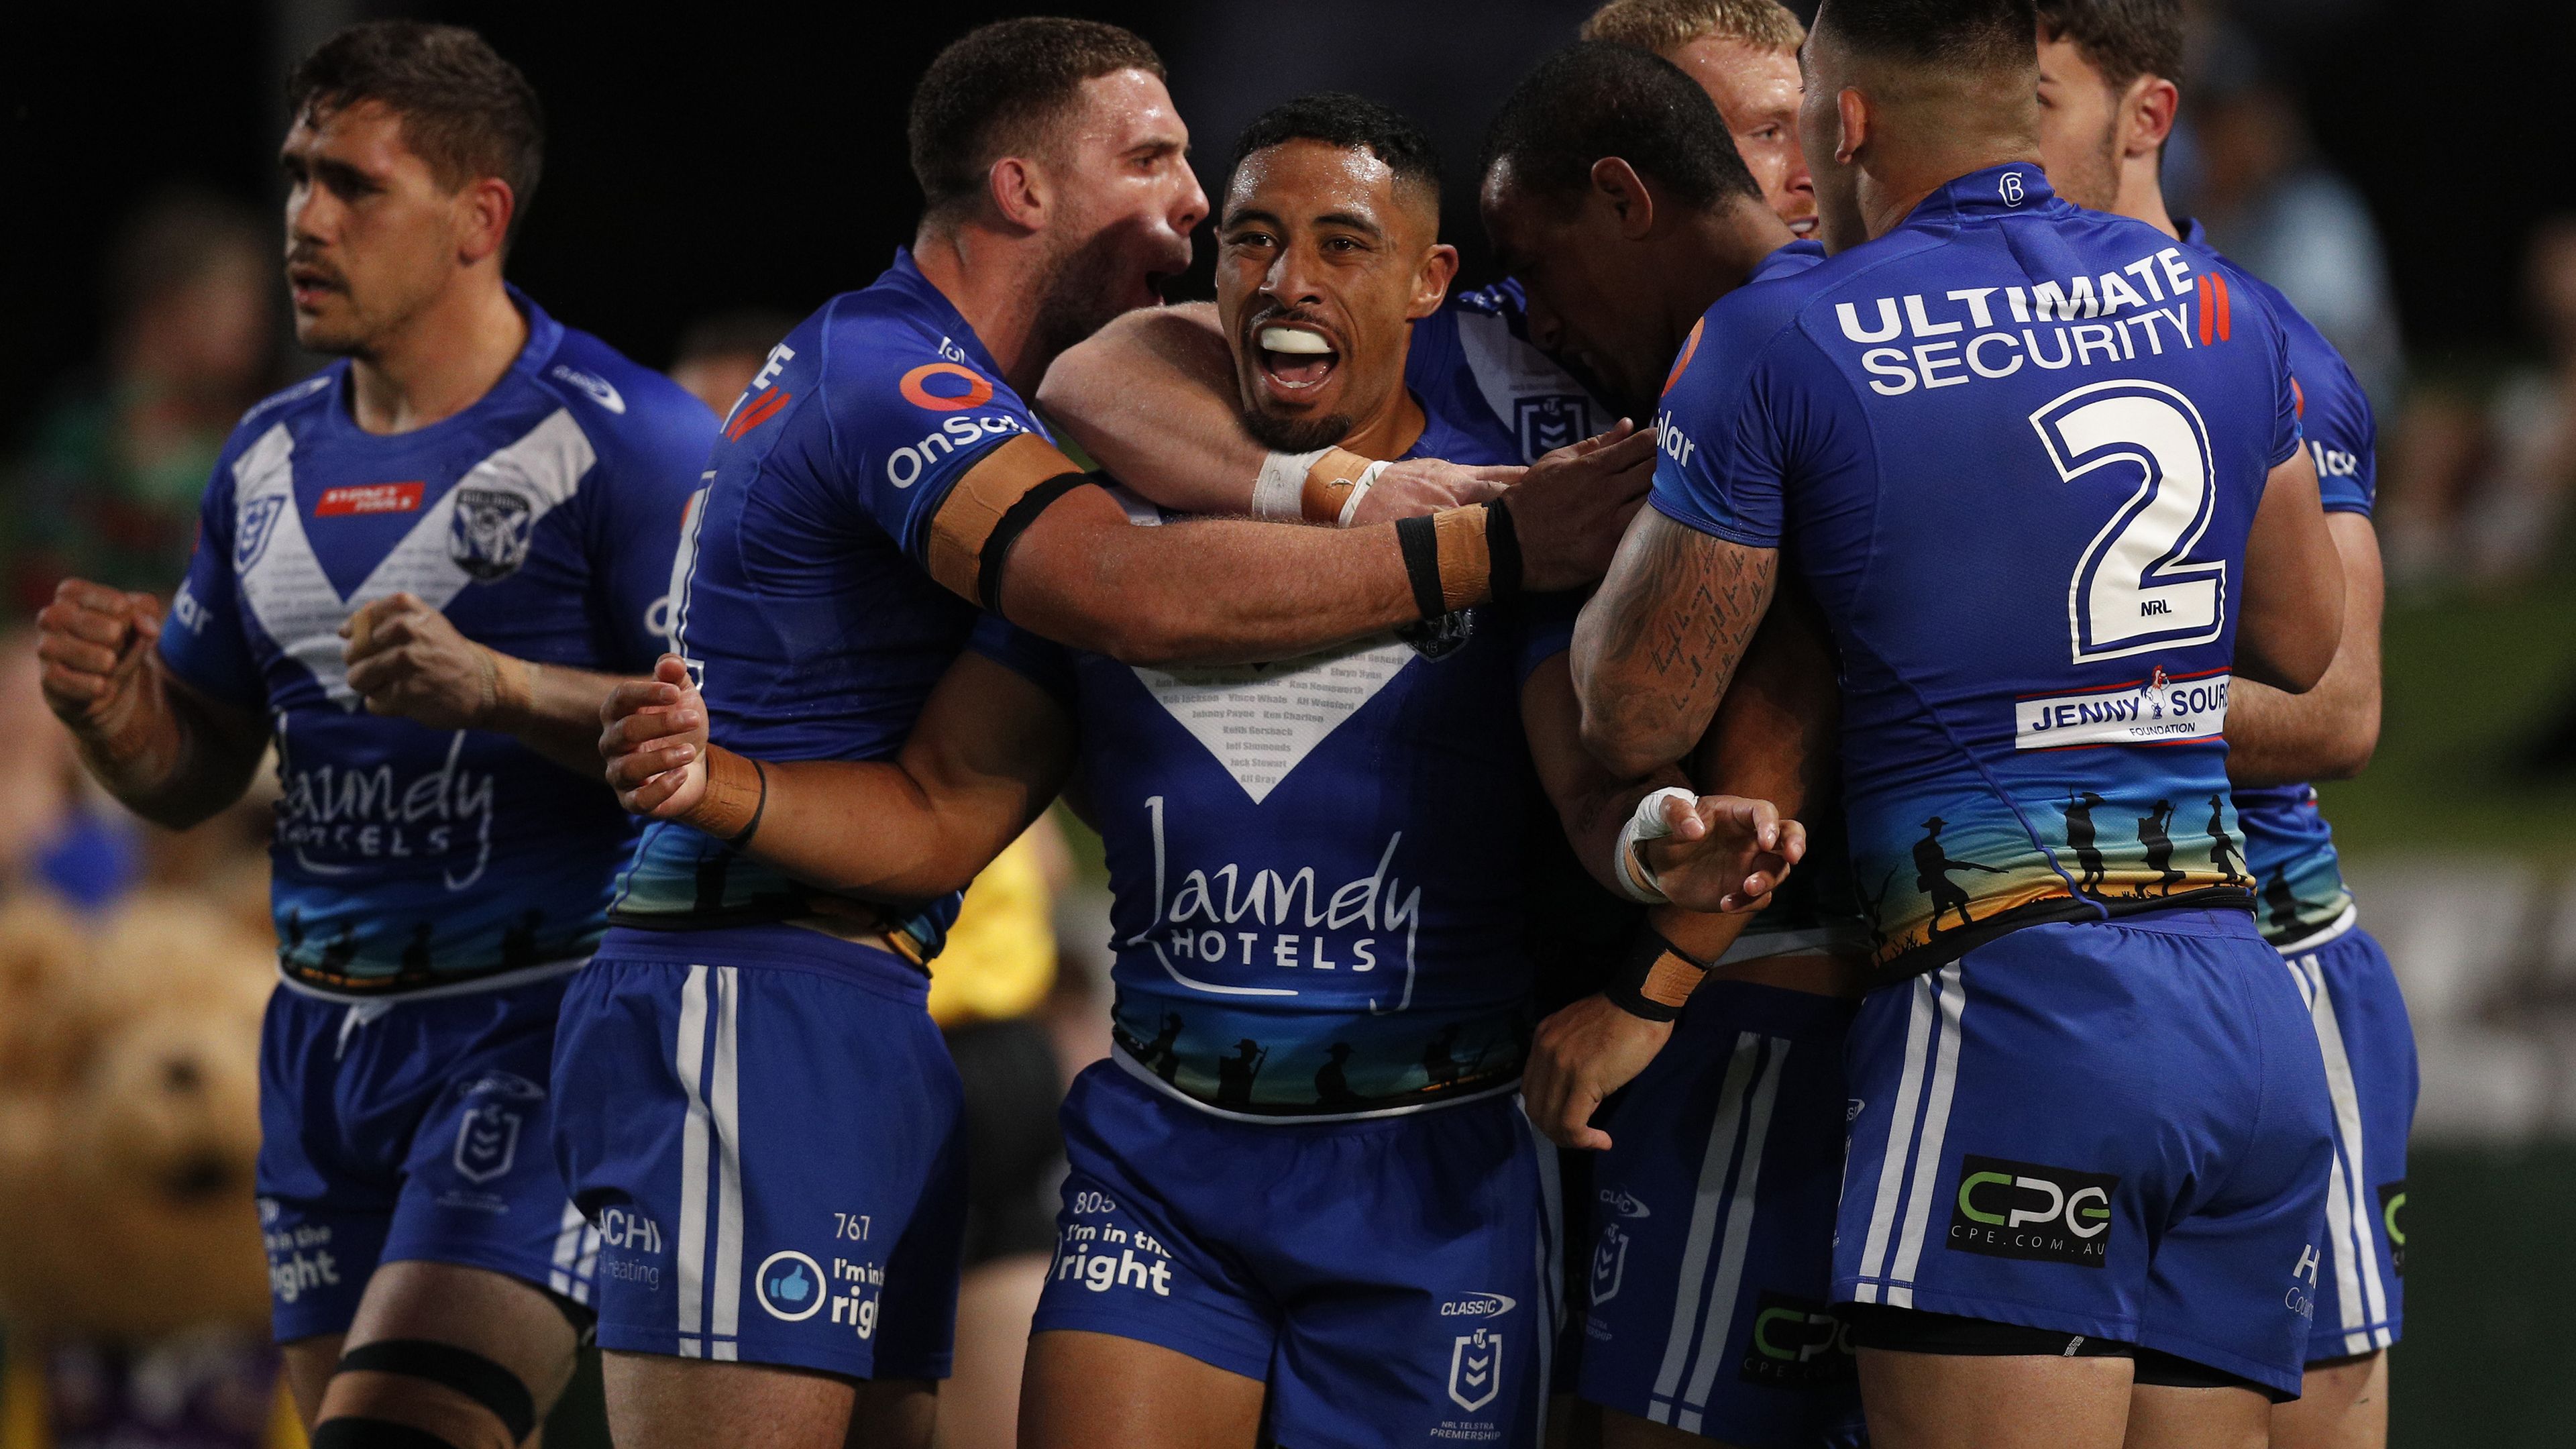 Canterbury Bulldogs win first game of season, beating Cronulla Sharks in last-minute thriller